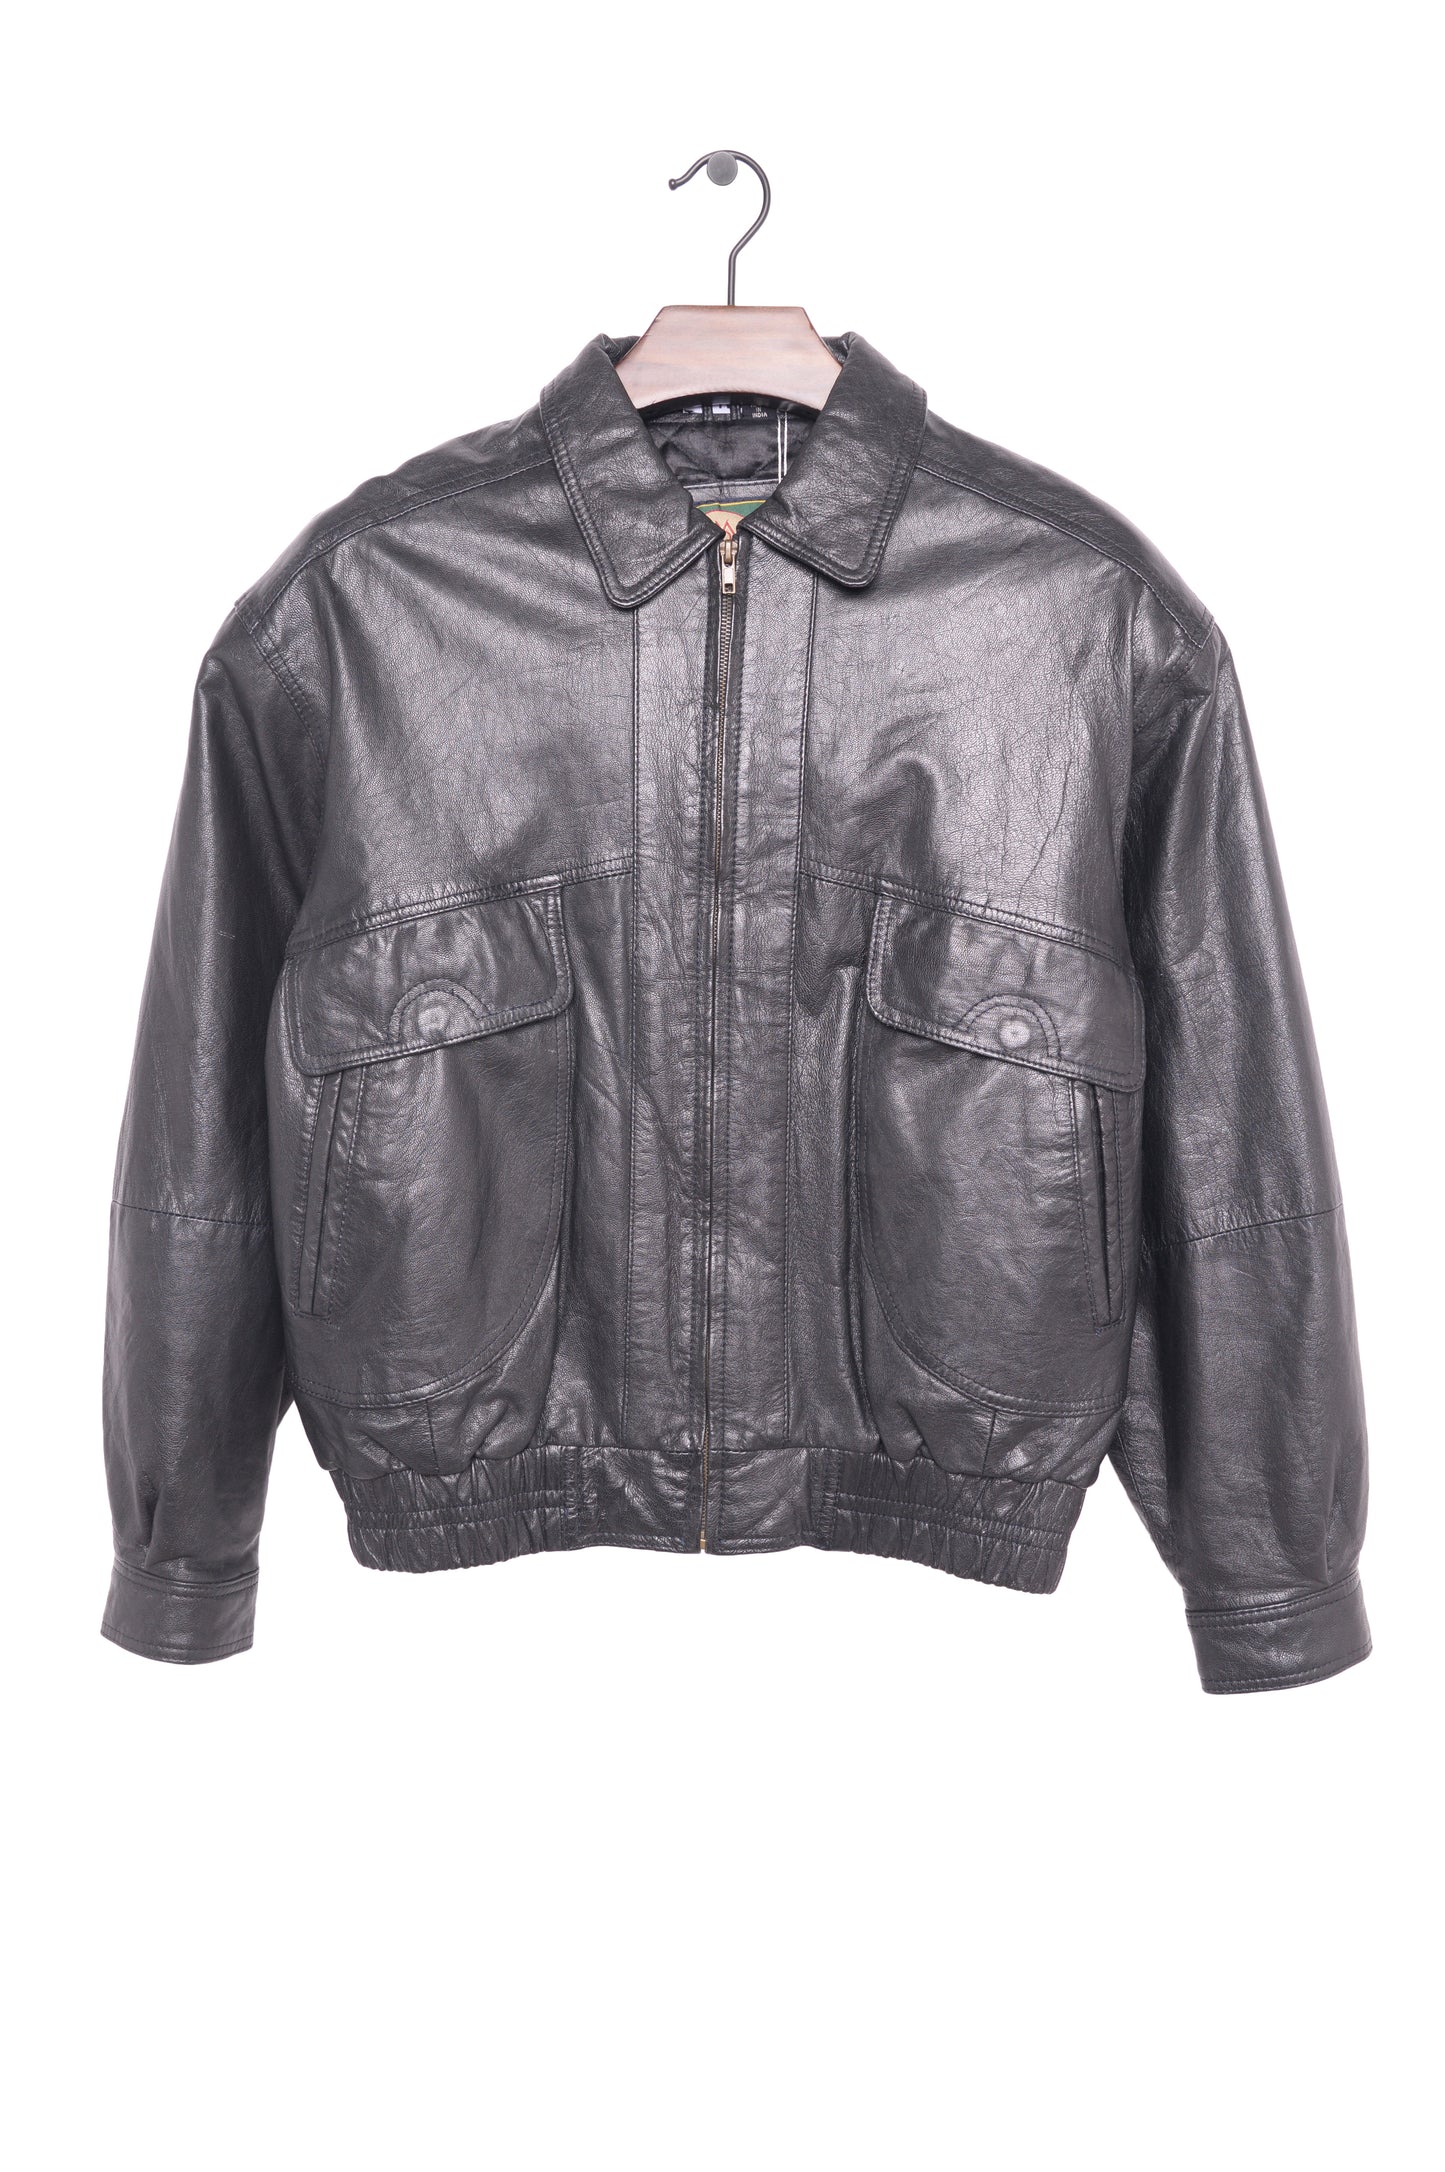 1980s Member's Only Leather Bomber